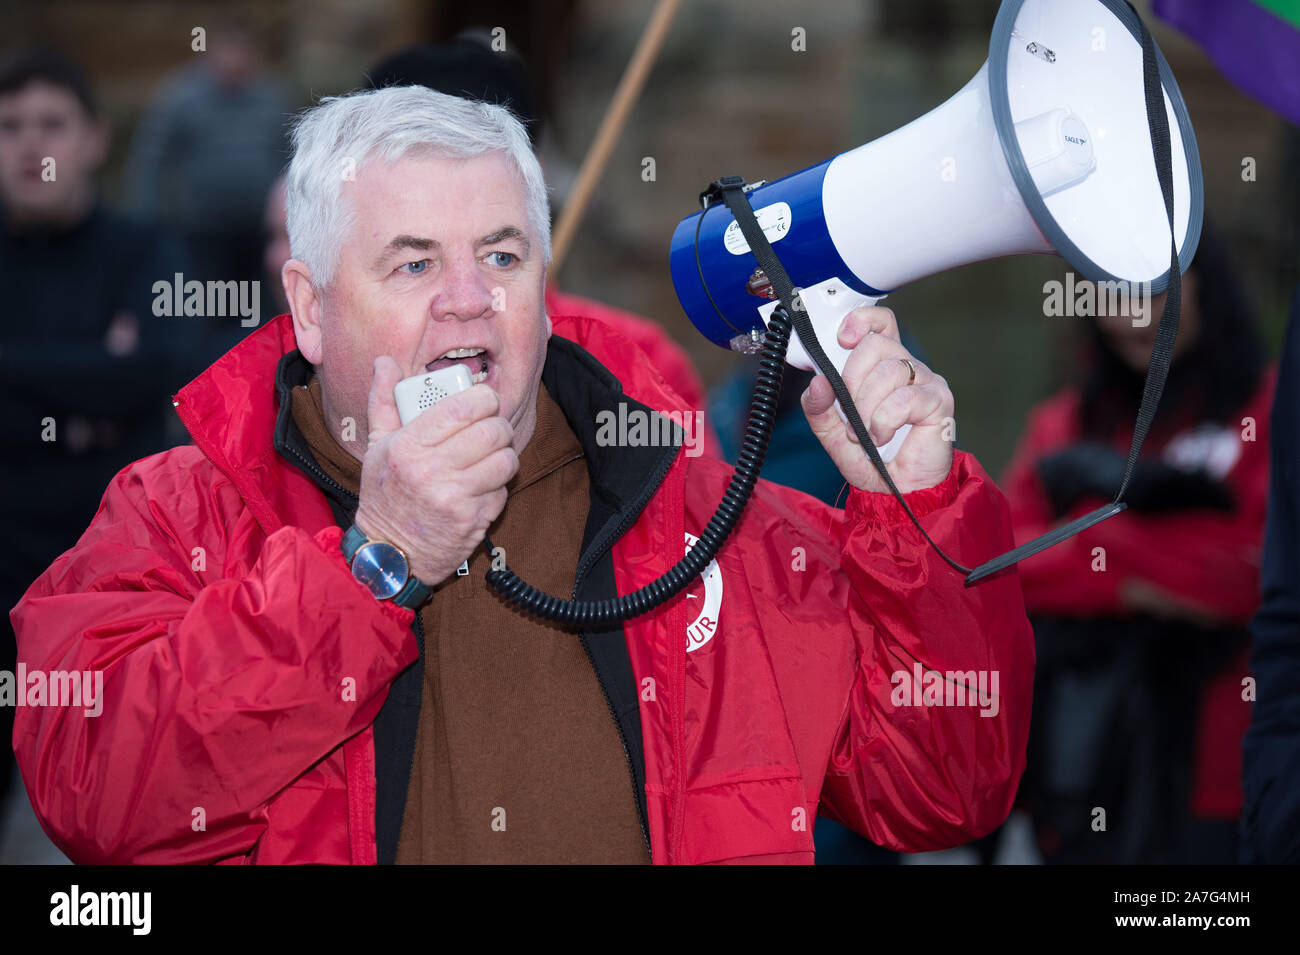 Coatbridge, UK. 2 November 2019. Poctured: Hugh Gaffney MP for Coatbridge, Chryston and Bellshill. Scottish Labour Photo Op in Coatbridge as things heat up for the snap UK Parliamentary General Election on 12th December 2019. Credit: Colin Fisher/Alamy Live News Credit: Colin Fisher/Alamy Live News Stock Photo